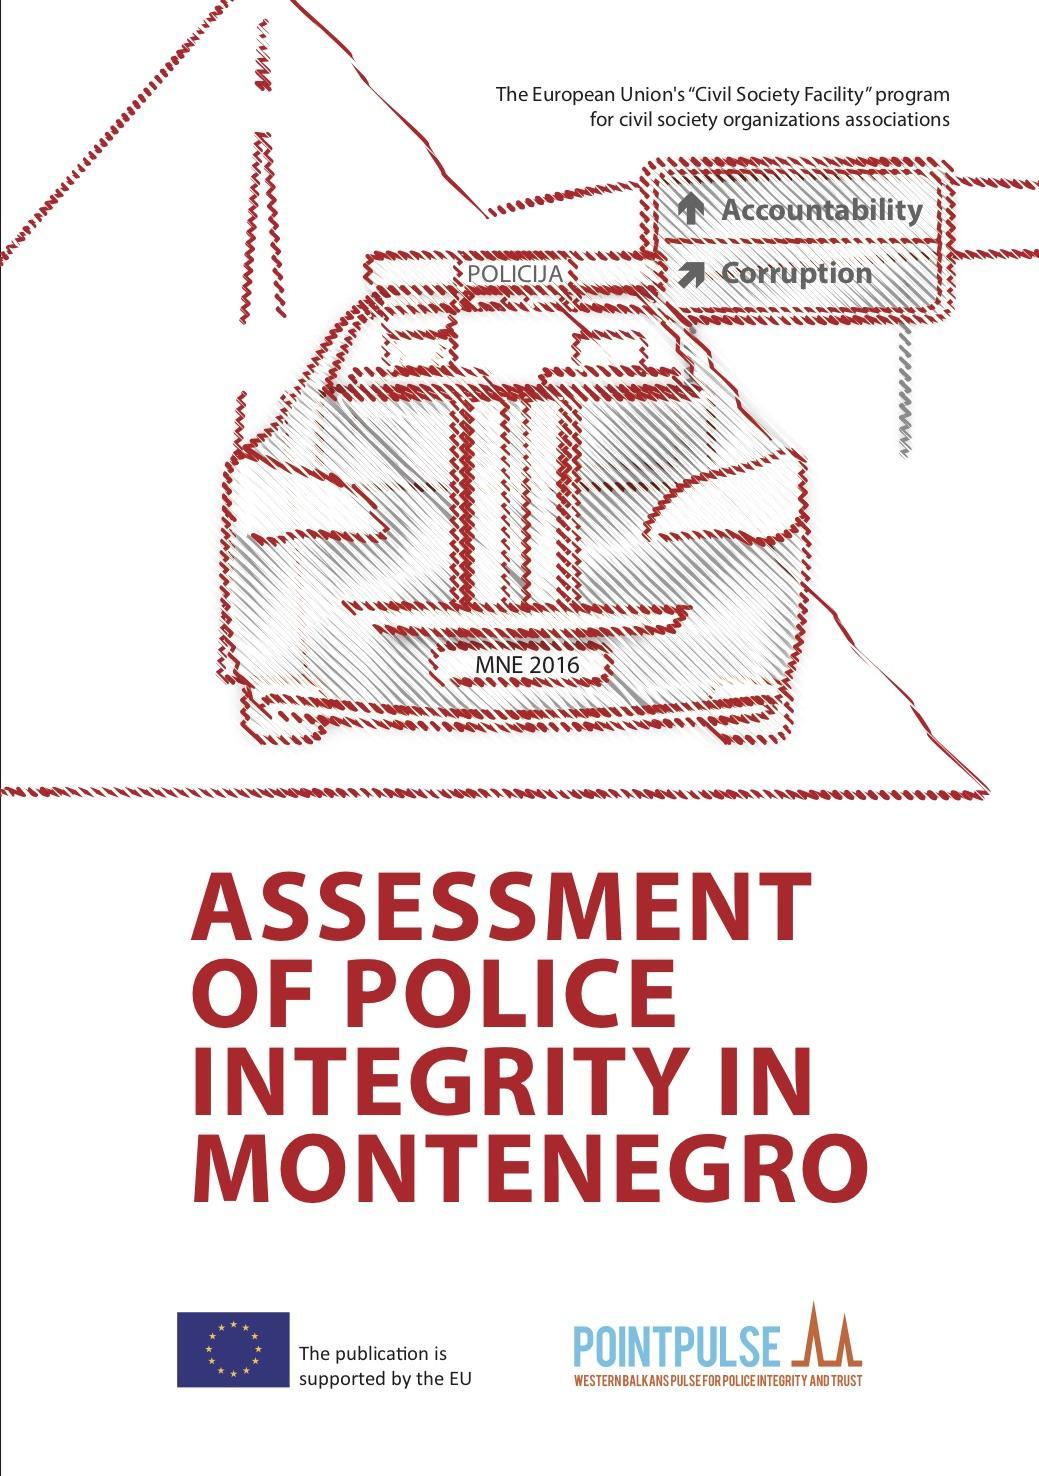 Assessment of police integrity in Montenegro (2016)